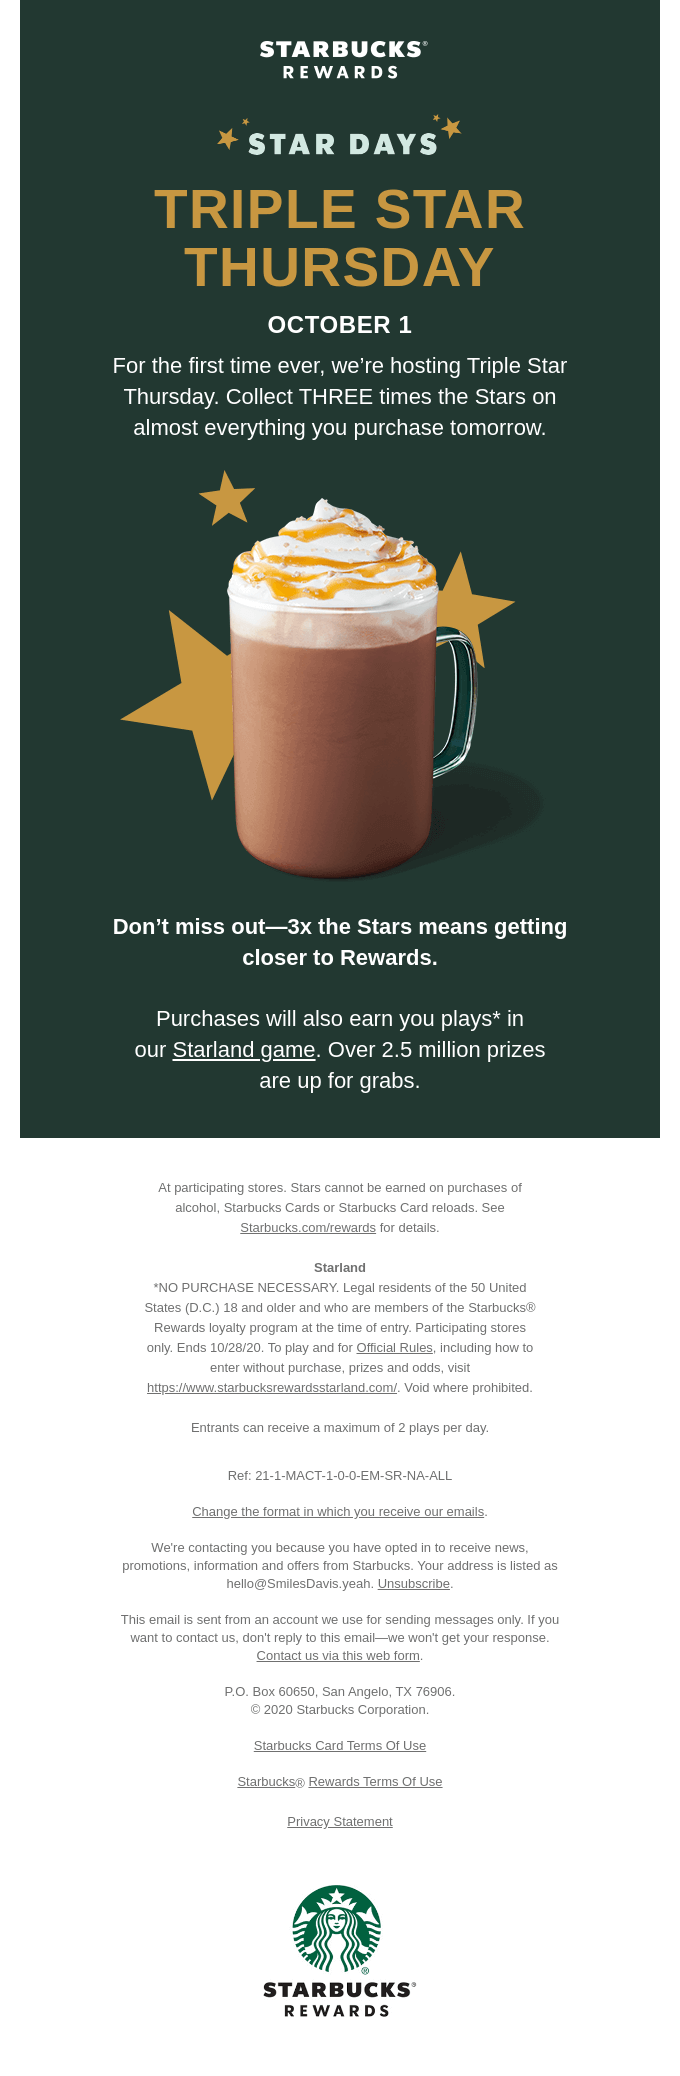 Email from Starbucks